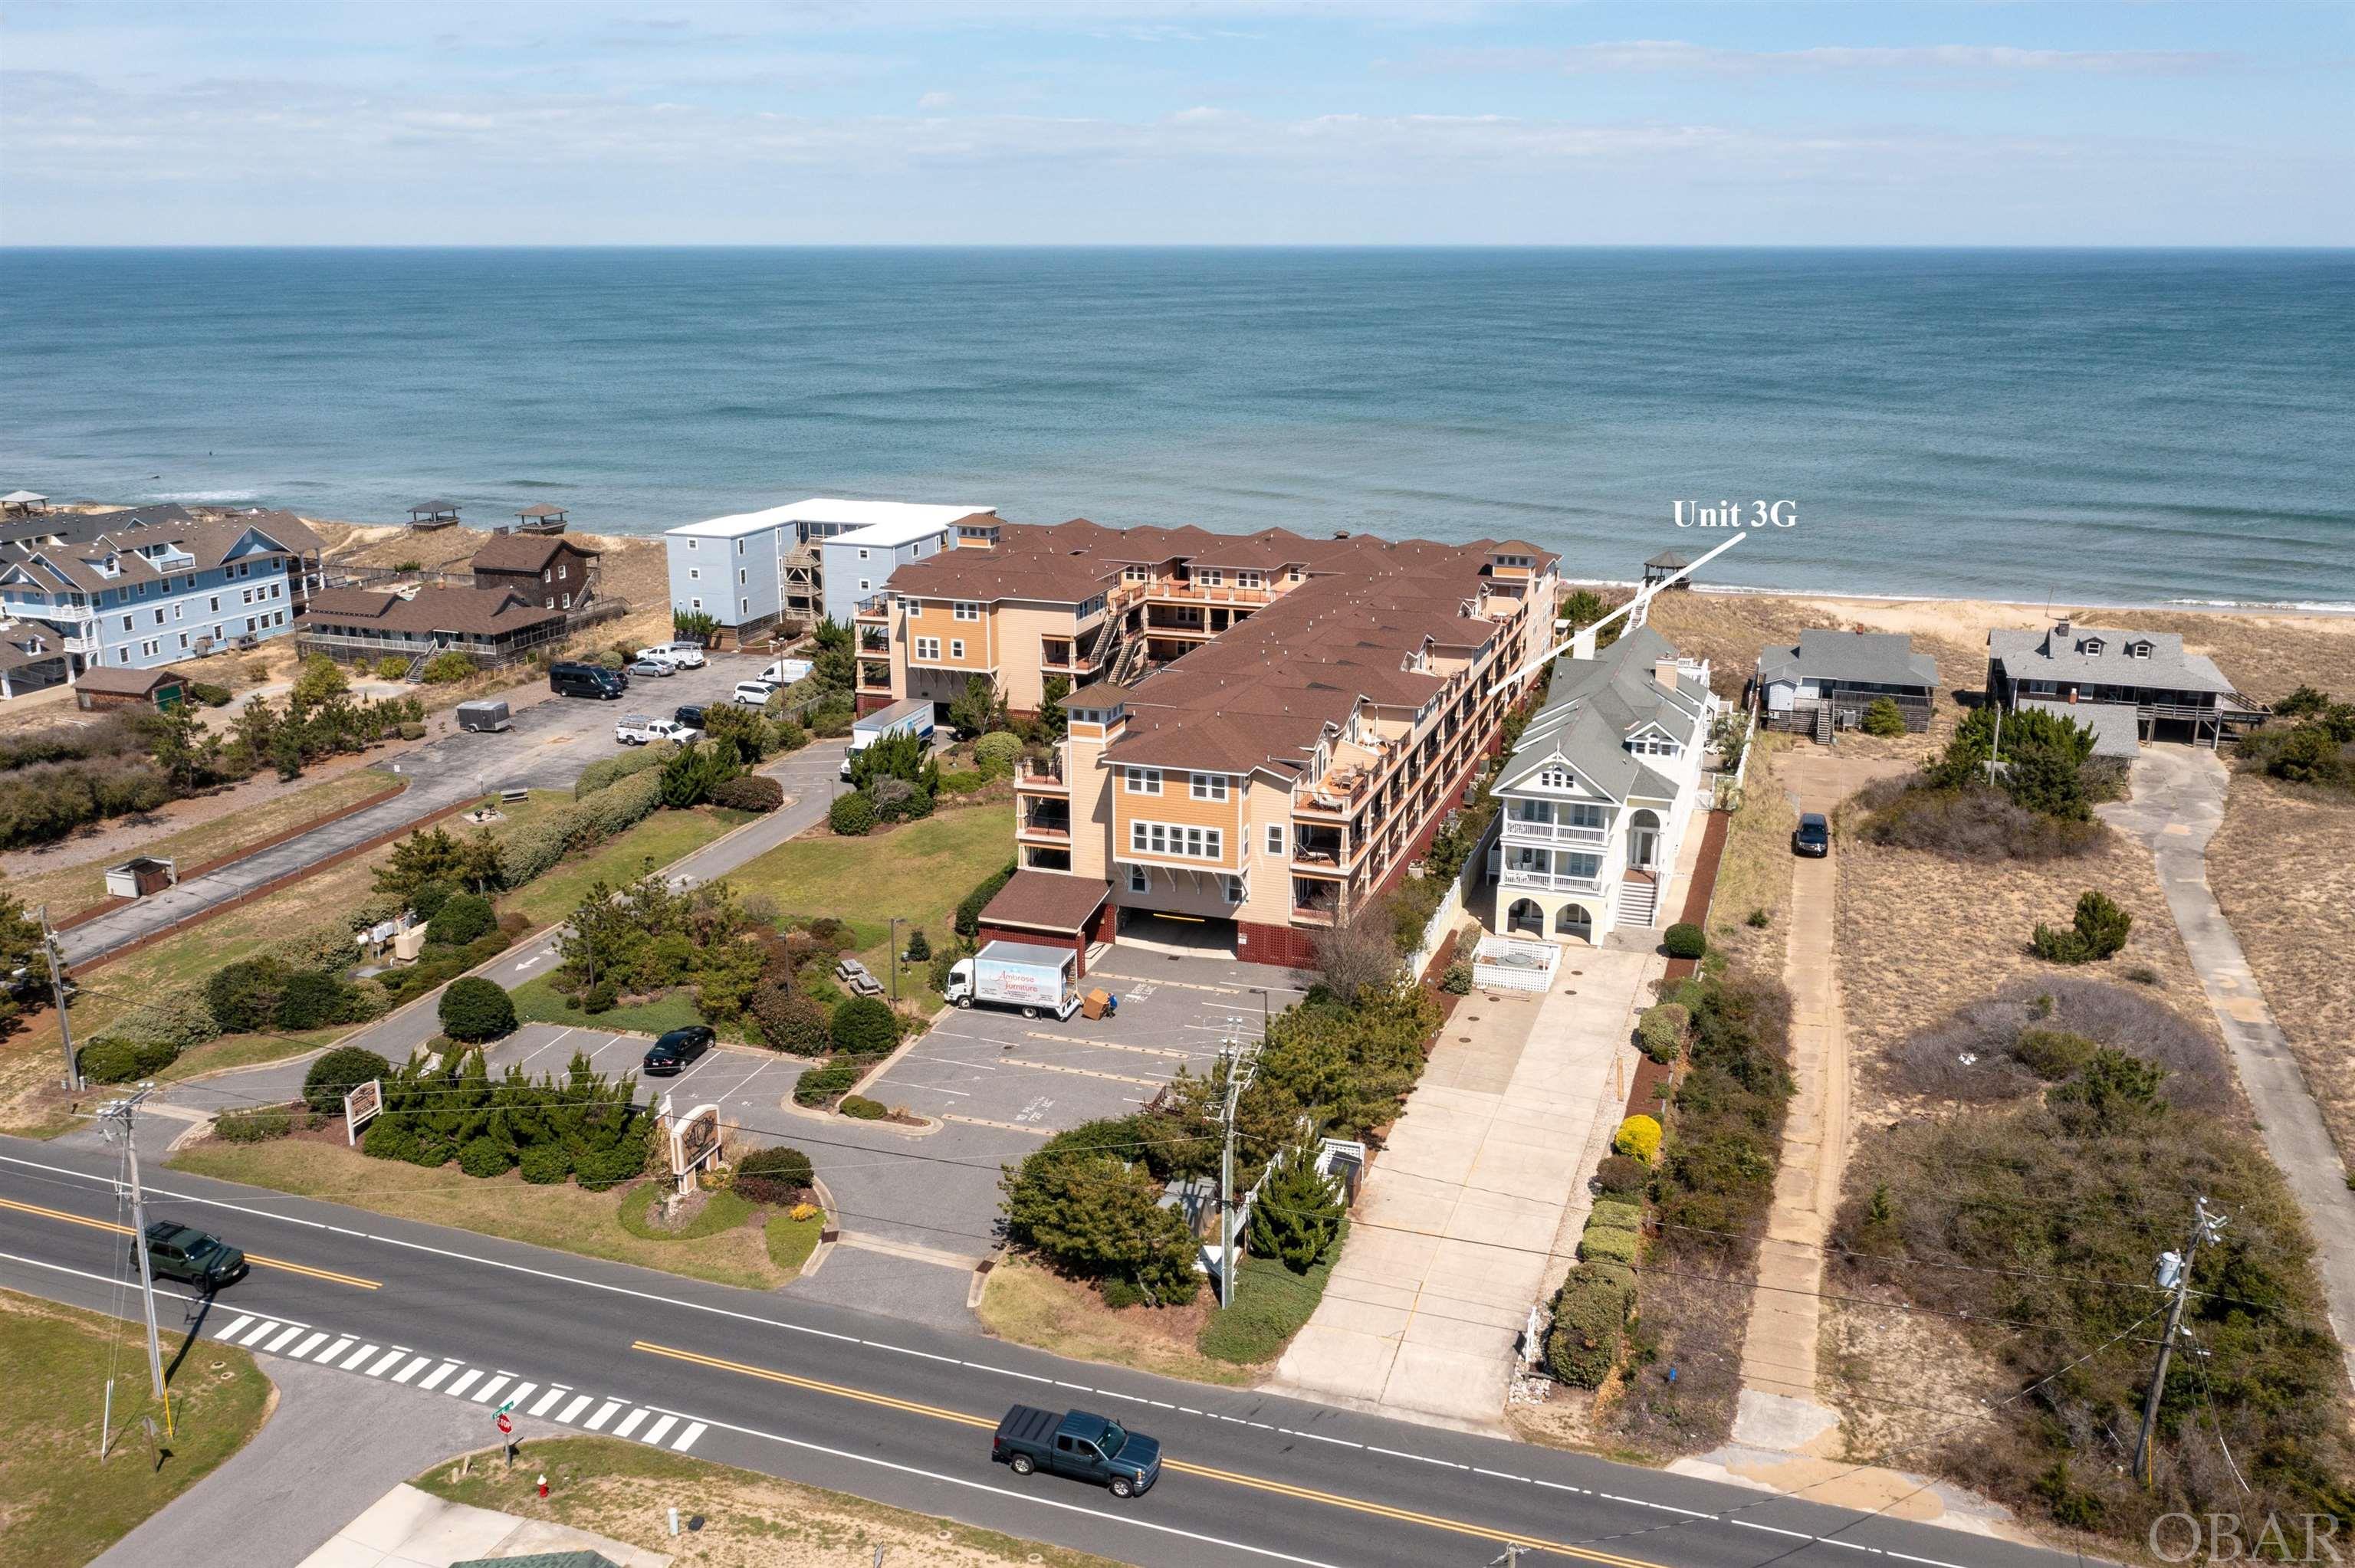 The exquisite Croatan Surf Club Condos embody the coveted Outer Banks lifestyle. Nestled on the oceanfront, these coastal contemporary designed high-end condos offer a plethora of amenities, allowing you to truly savor the Outer Banks experience. This two-level floor plans makes for an ideal living space with  convenience as the covered parking providing a dry entry point, and the near by elevator access ensures that even heavy loads or grandparents can easily reach their destination. Rich mahogany-toned hardwood floors, transition smoothly into light ceramic tiles. Crown molding graces the tall ceilings, and the open floor plan offers a spacious and welcoming atmosphere. A full bath on main level services the kids bedroom and living spaces. The covered deck spaces on each level provide ocean views and plenty of space to relax. There is private deck access from one of the en-suite bedrooms and the living room, make outdoor enjoyment an absolute pleasure. The oversized kitchen has been thoughtfully designed for both style and functionality, with an abundance of coastal white cabinetry, granite countertops, and bar seating. The open concept dining and living areas flow into an outdoor deck overlooking the Atlantic Ocean, bathed in the warm Southern exposure sunlight. The first level features two en-suite bedrooms, complete with tubs and walk-in tiled showers. These units are a testament to quality construction and offer amenities for all your guests. A green space is available for four-legged friends and children to play on non-beach days, and the covered parking area includes a beach lock-up for each owner to store all their beach toys and sandy belongings. The amenities at Croatan Surf Club offer an expansive outdoor curved heated pool, spanning over 80 feet, is complemented by a substantial in-ground hot tub and a kiddie pool with a beach-style entry. Two access points lead to a gazebo with panoramic views of the Atlantic Ocean, providing easy access to one of the finest beach areas in Kill Devil Hills. Additionally, an indoor heated pool, hot tub, and fitness area are open year-round, offering a wonderful escape on rainy days or during the winter. With a solid rental income history, this turnkey unit is an excellent investment opportunity, a perfect primary residence, or a true secondary home. Contact me today for a private tour and a buyer consultation to make your Outer Banks dreams a reality!